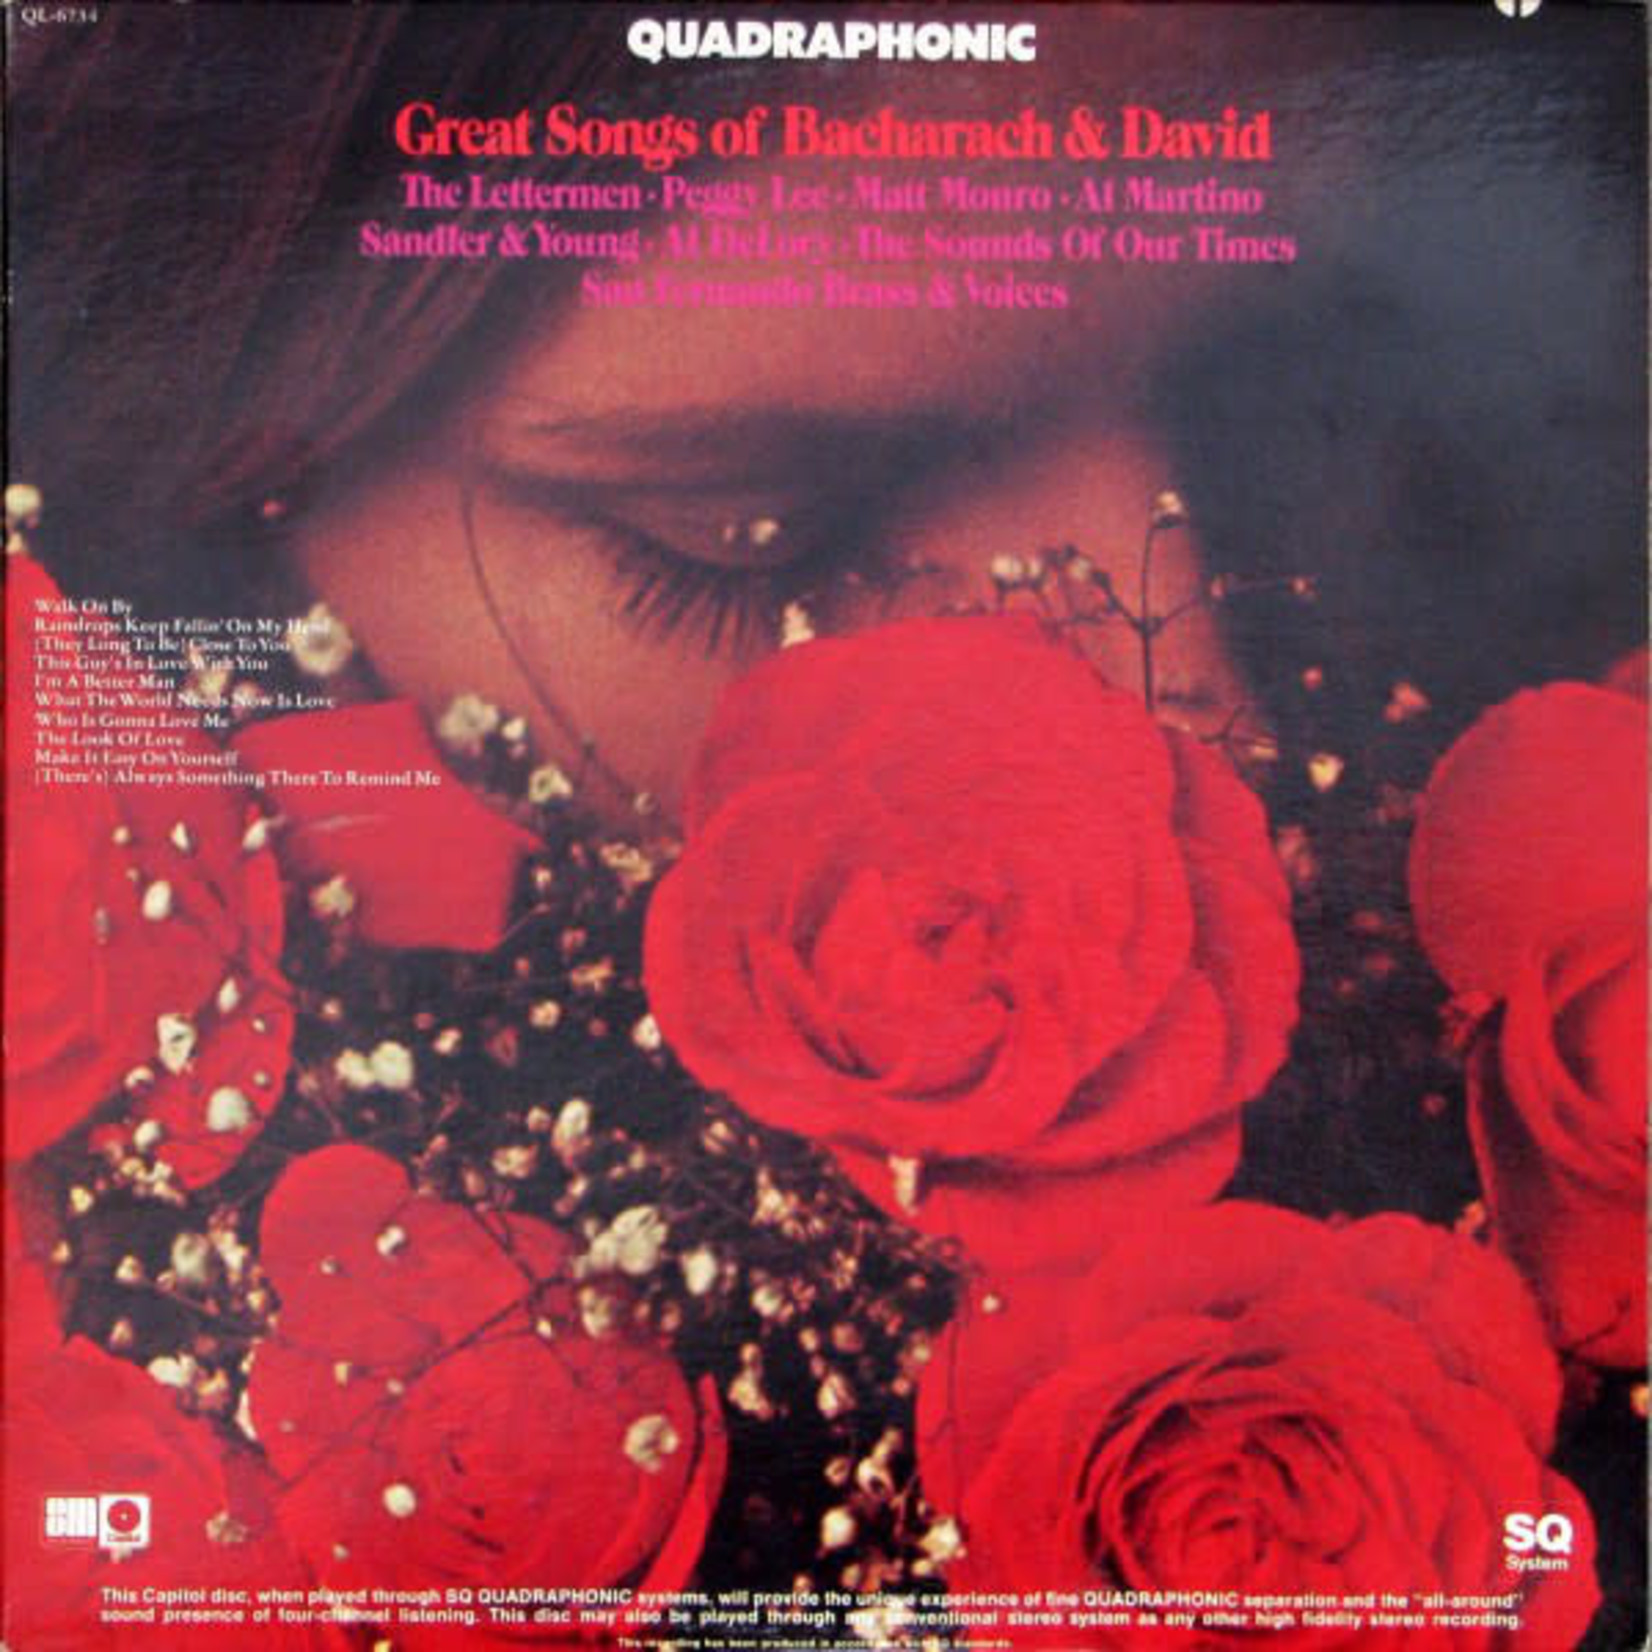 Various – Great Songs Of Bacharach & David (VG, 1972, LP, Creative Products / Capitol Records – QL-6734, USA)